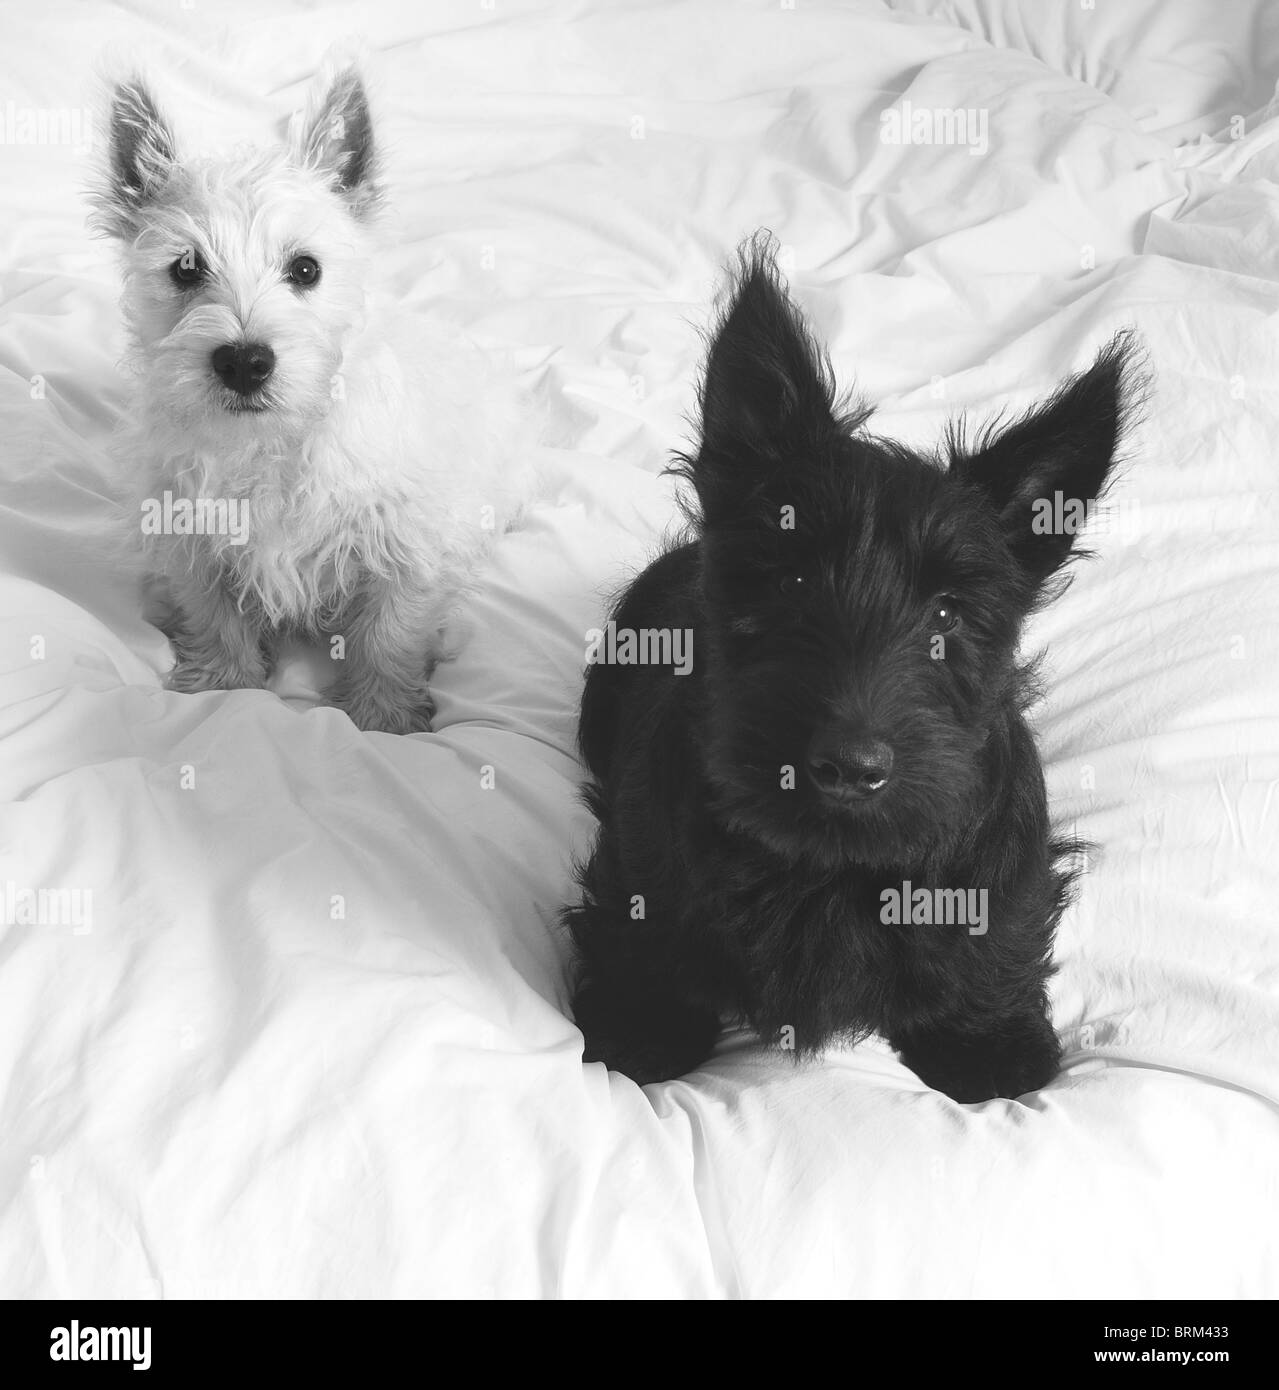 A White West Highland Terrier puppy dog (Westie)( Baxter) and a Scottish Terrier puppy dog (Scottie)(Fergus). Black and White Stock Photo